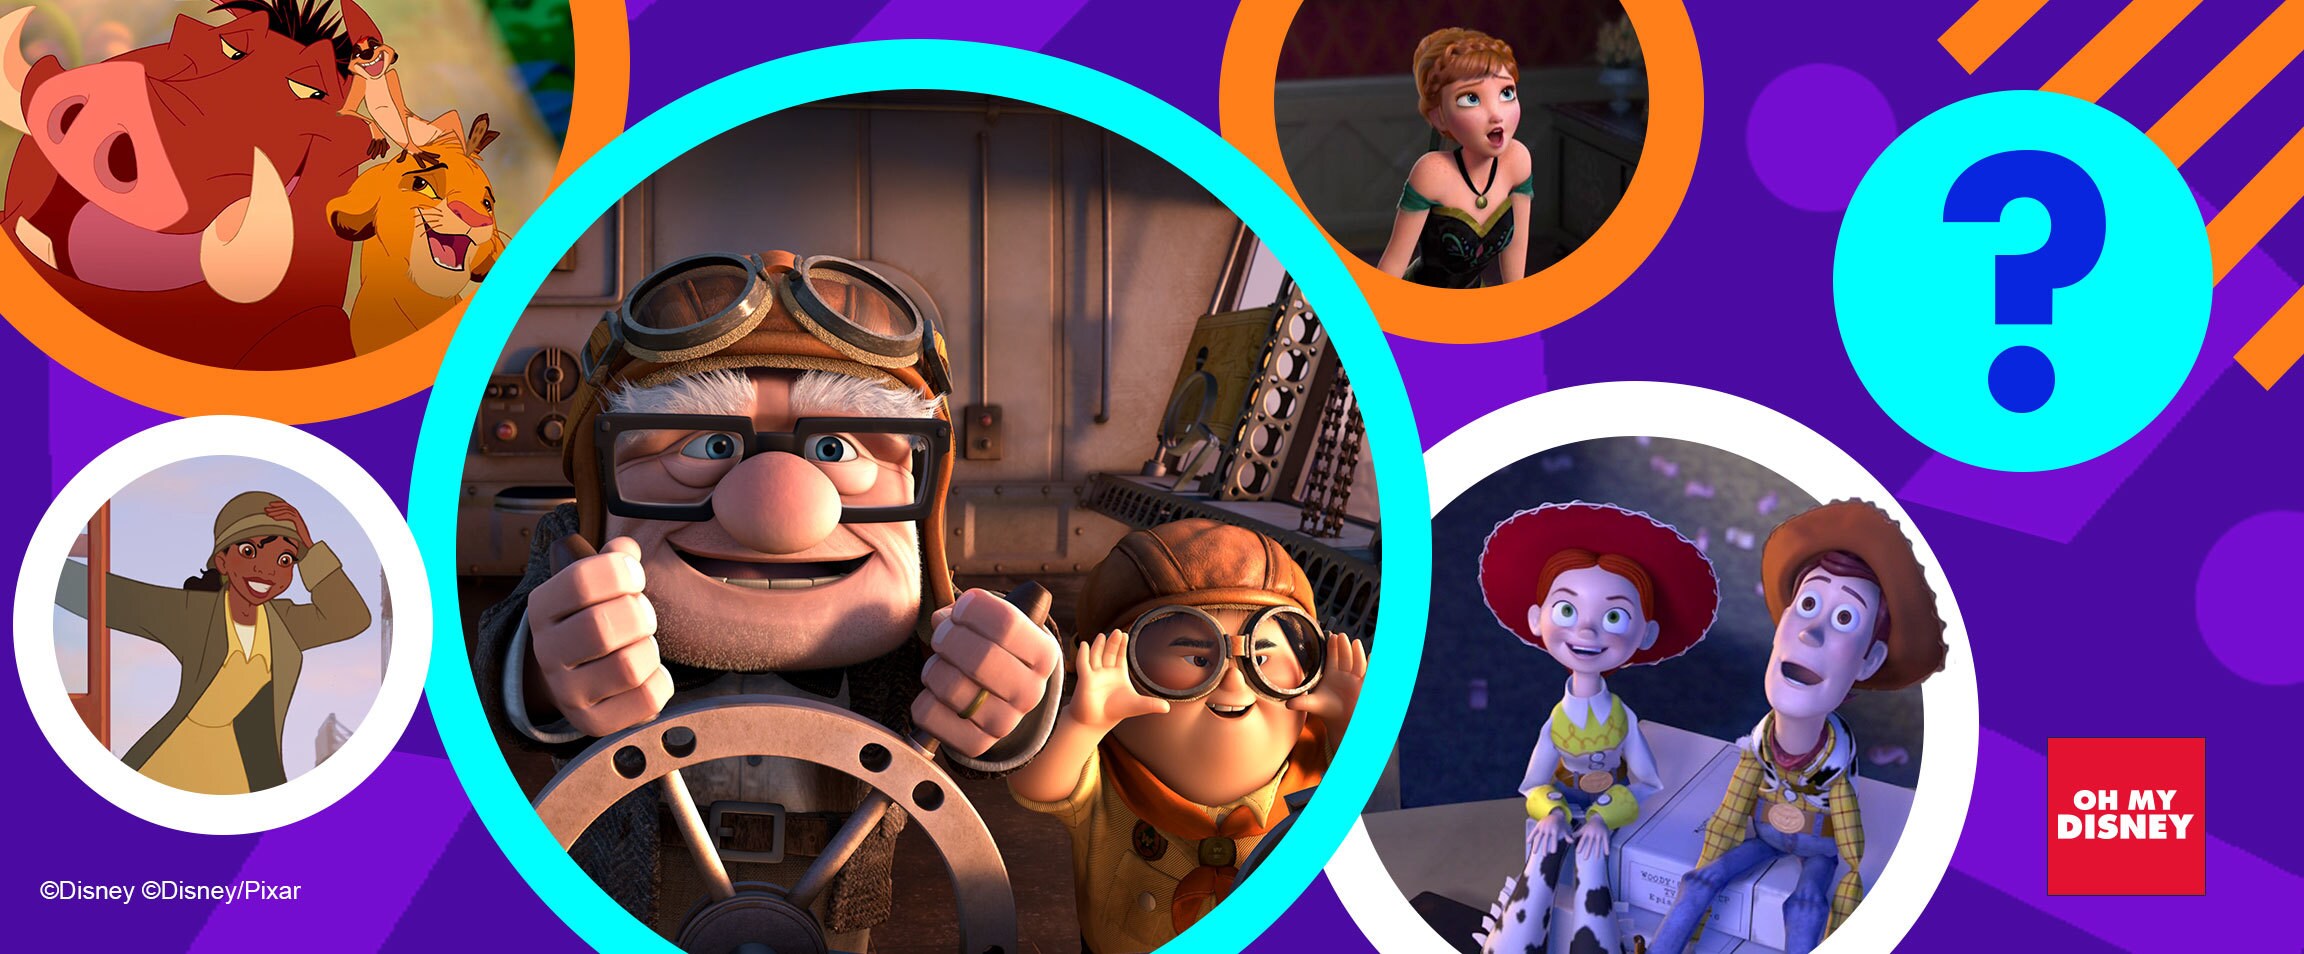 Brighten Up Your Next Video Call With Backgrounds From Pixar